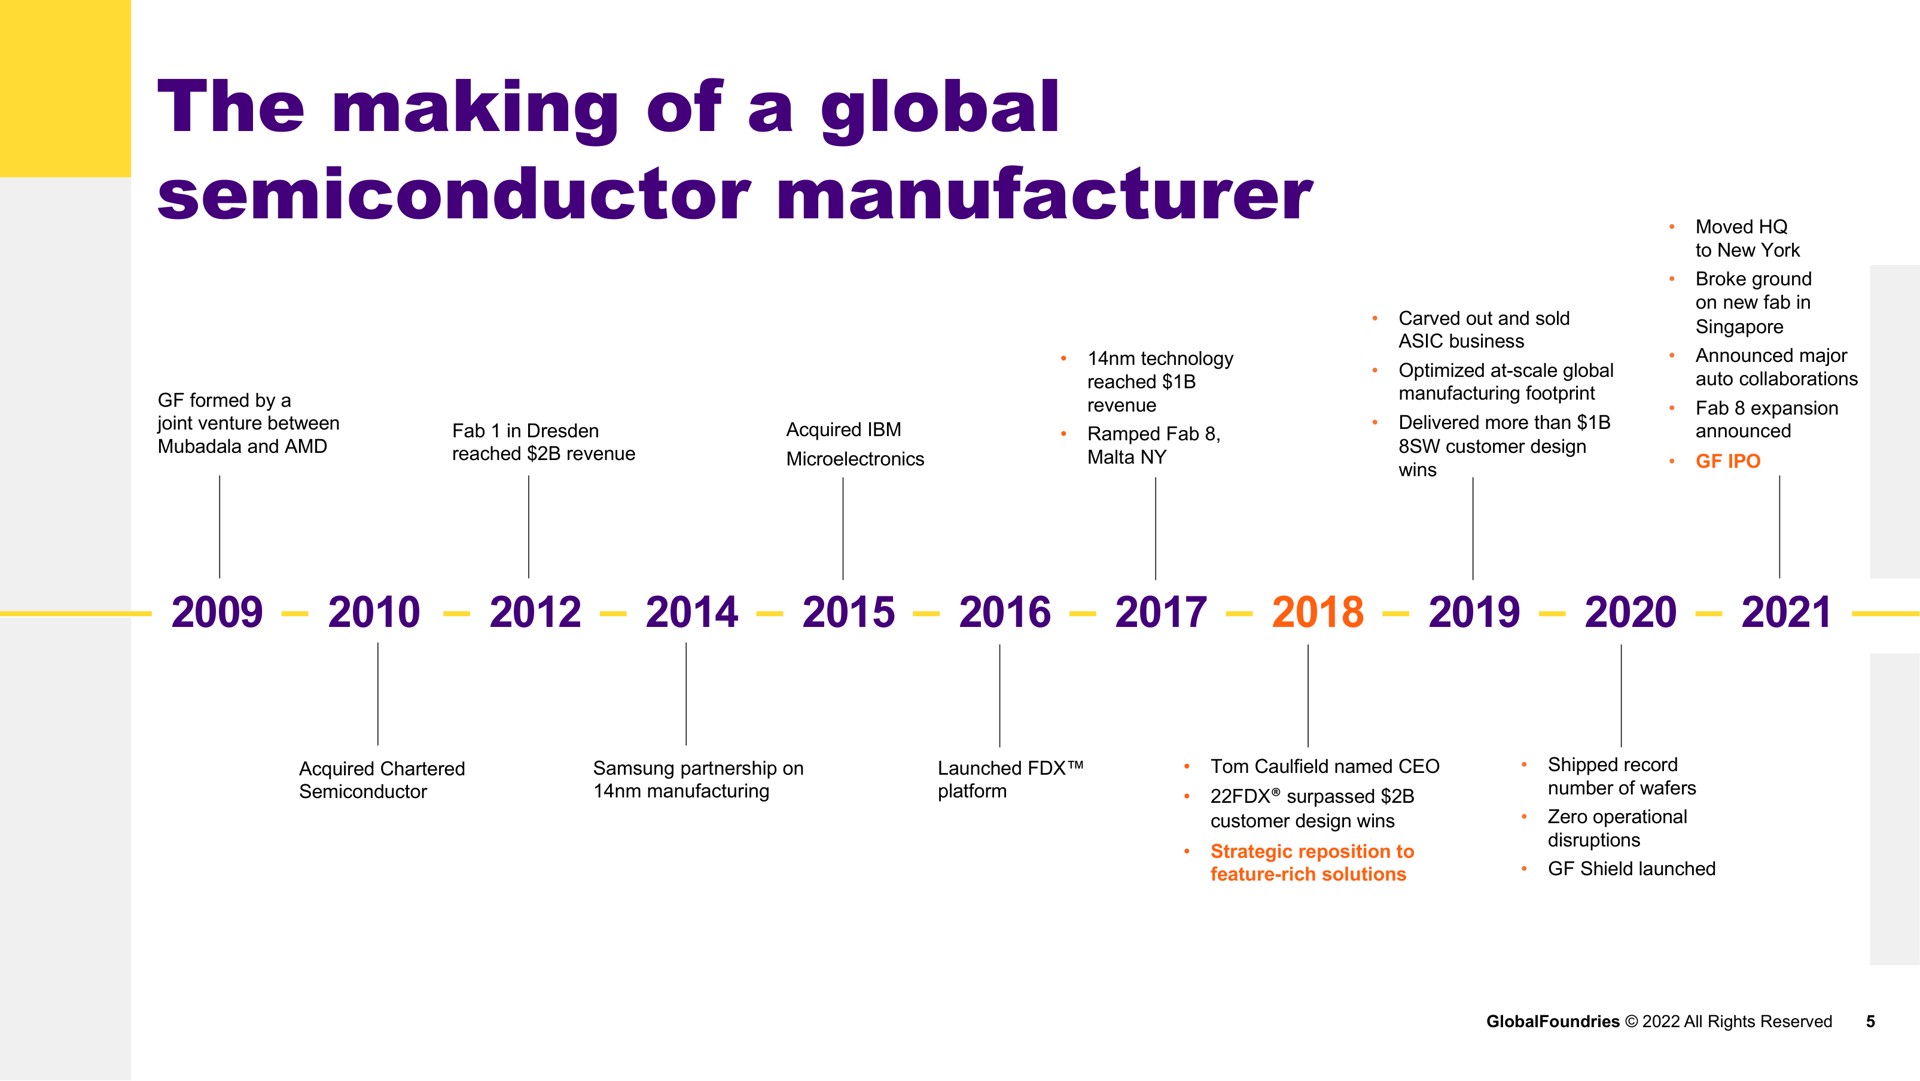 the making of a global semiconductor manufacturer | GlobalFoundries